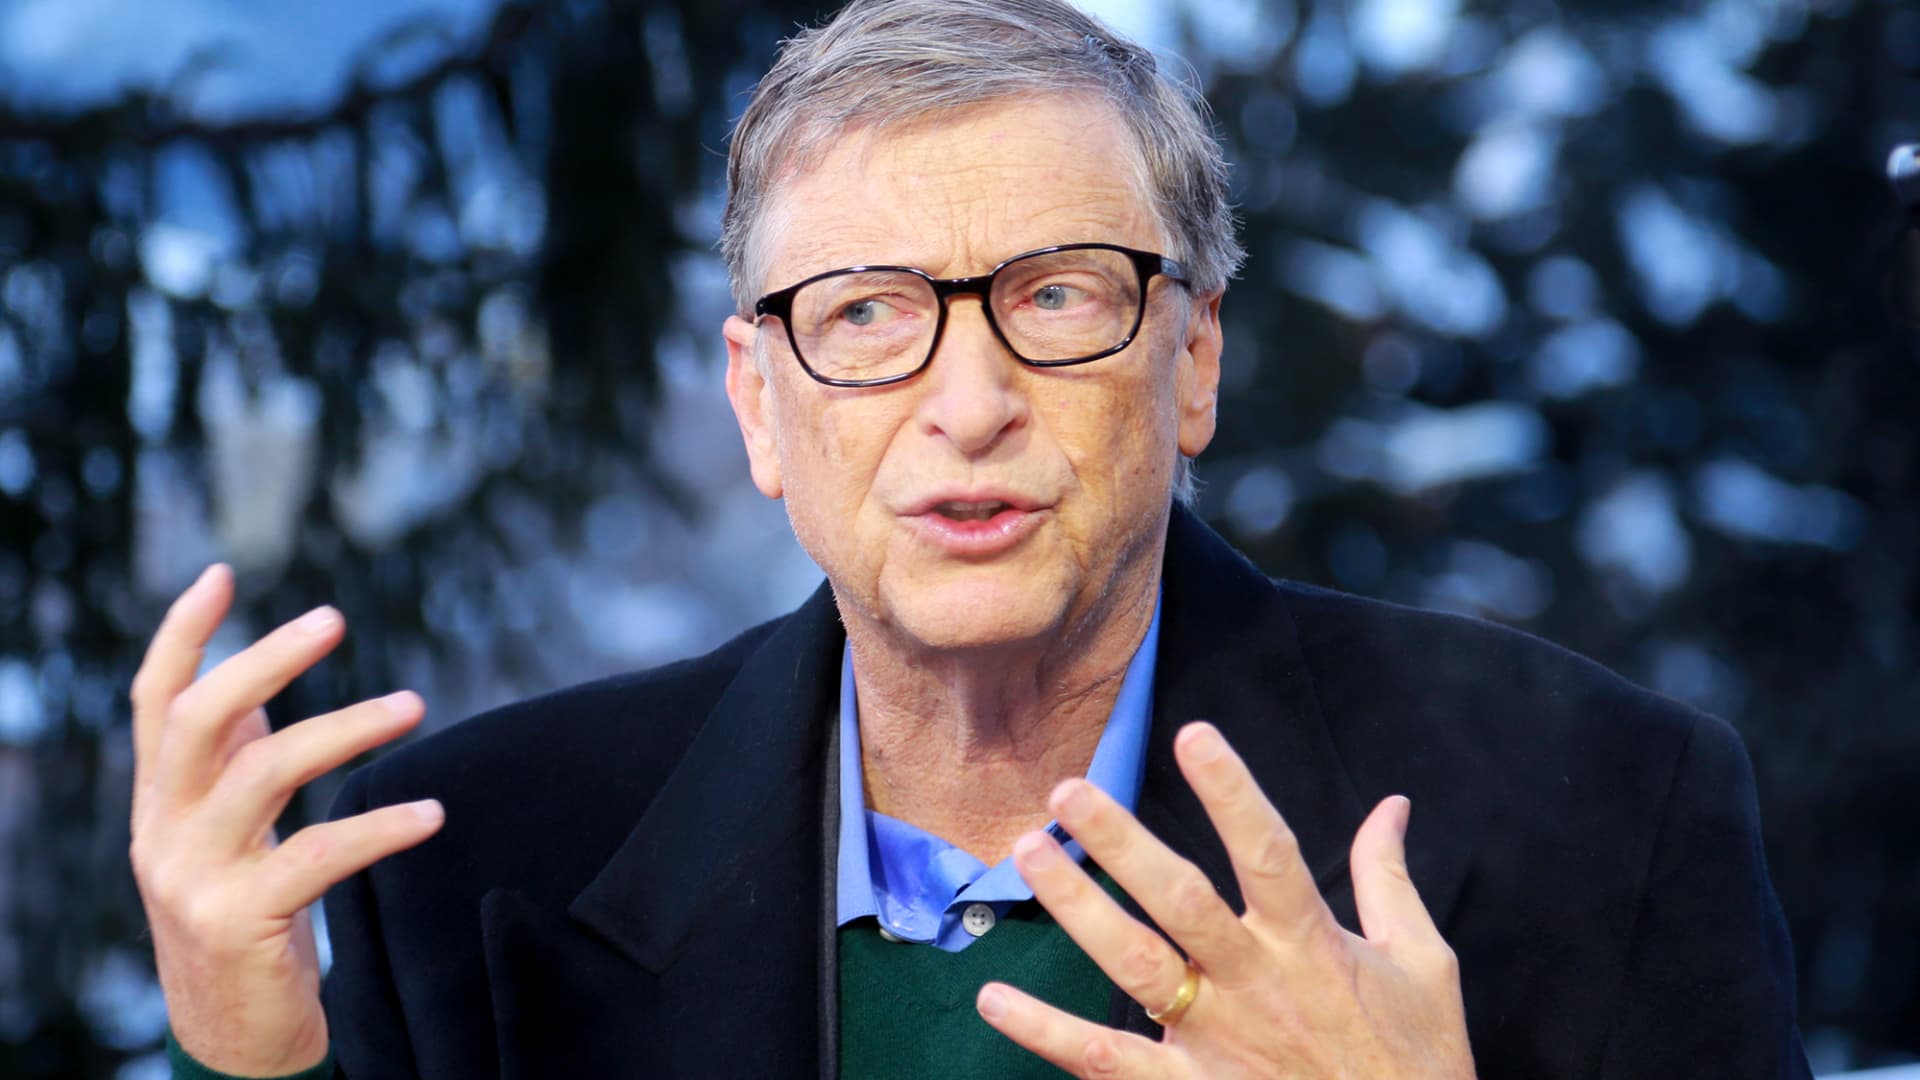 Bill Gates: Countries shut for coronavirus could bounce back in weeks